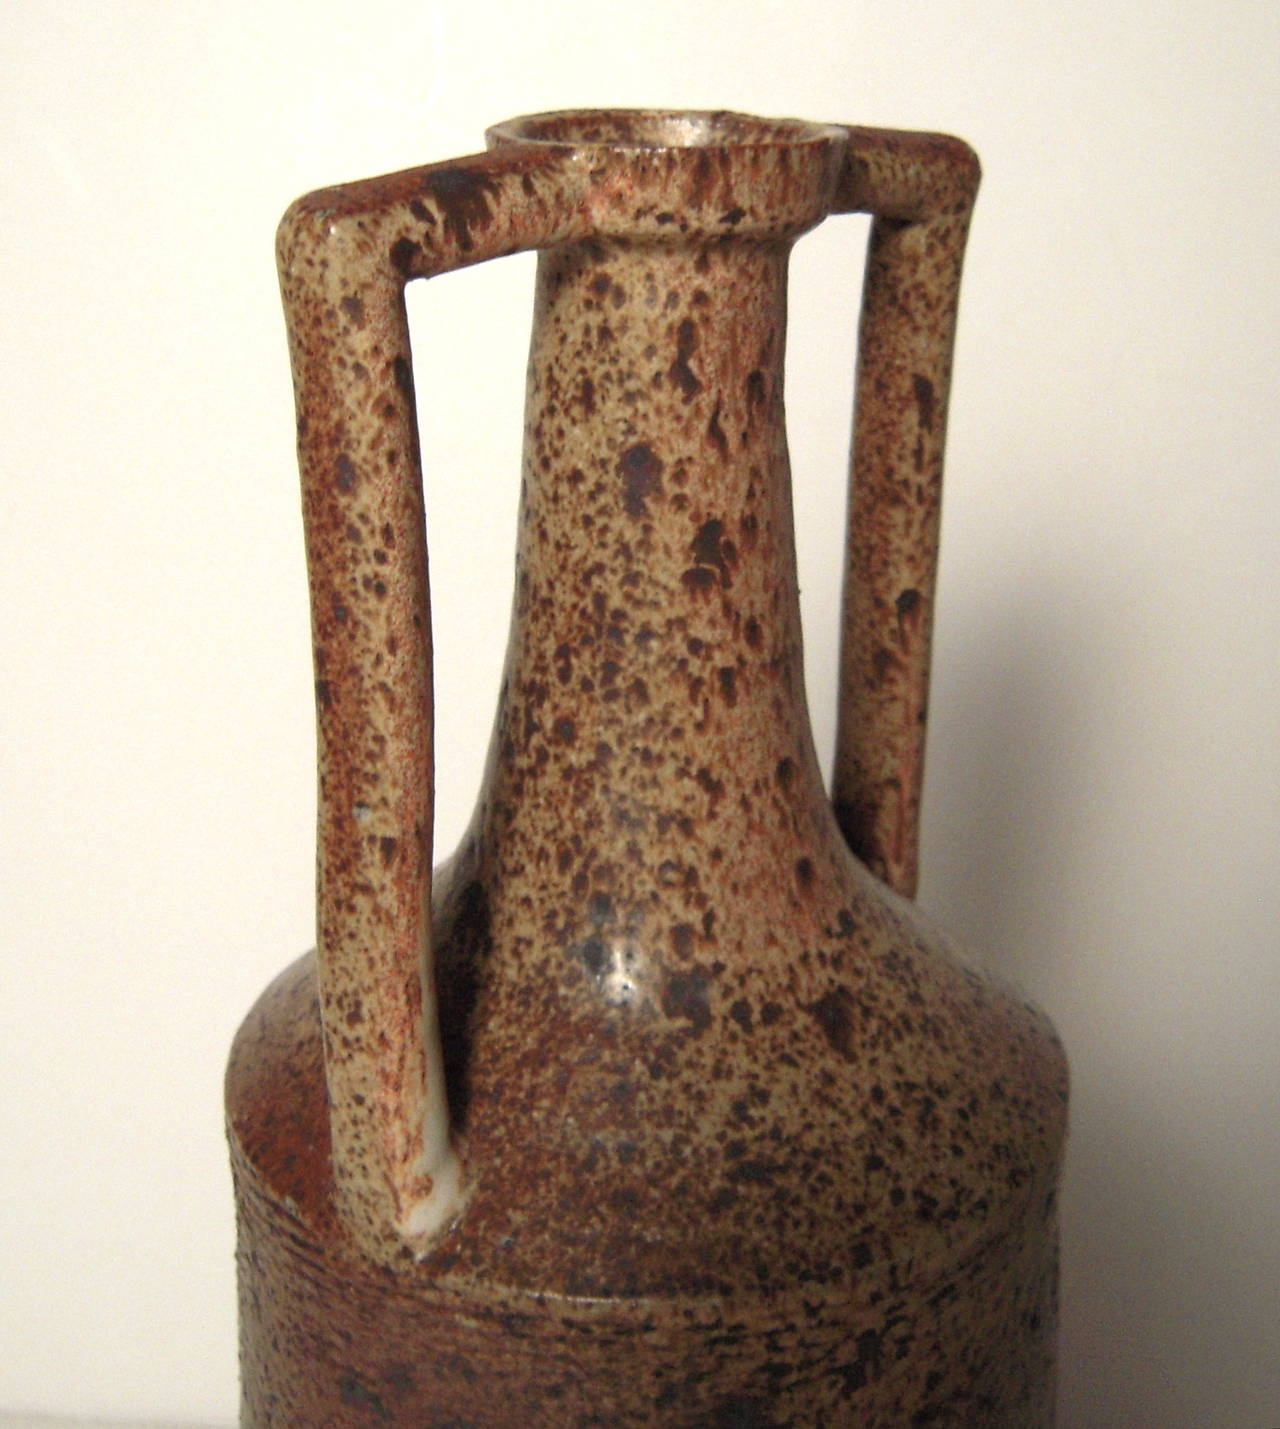 A tall neoclassical style stoneware amphora, circa 1960s-1970s with mottled brown and tan glaze and incised semicircular decoration, the bottle opening above an everted neck flanked by geometric handles above a cylindrical body tapering down to a